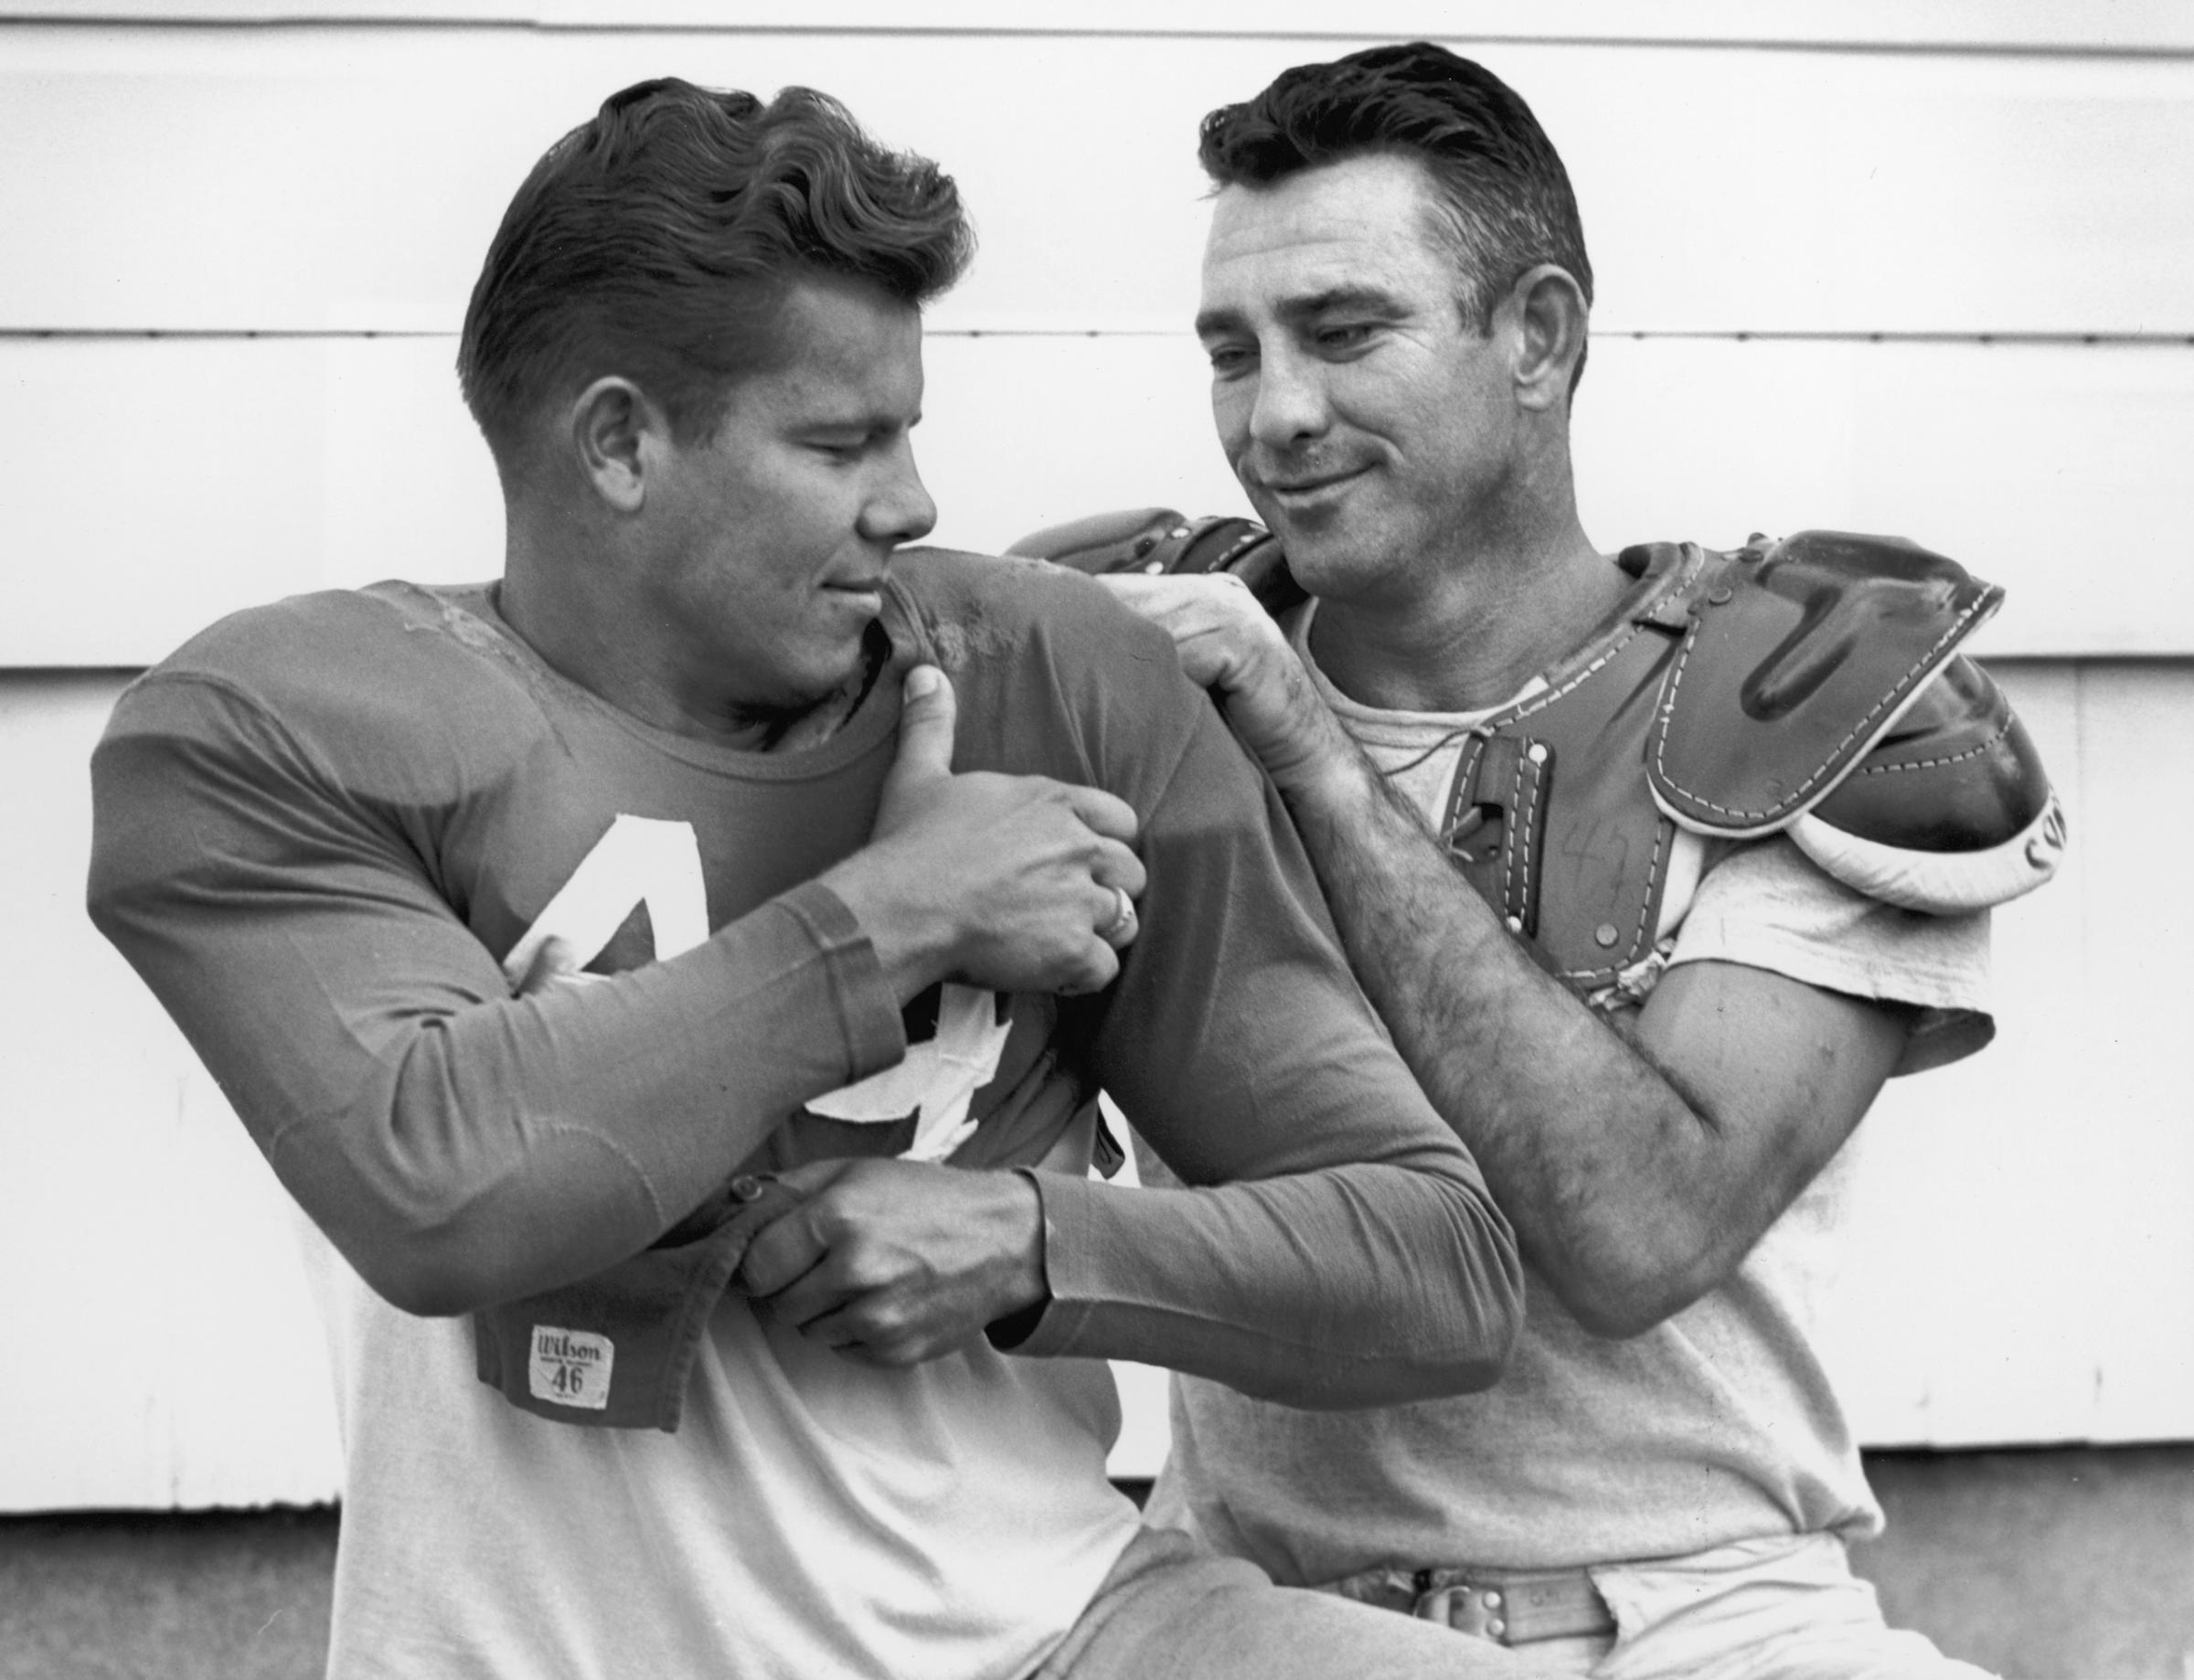 Football player Charlie Conerly (right), quarterback for the New York Giants, attempts to assist his teammate, halfback Kyle Rote, by untangling the back of his jersey that has gotten caught in his shoulder pad, circa 1950s.